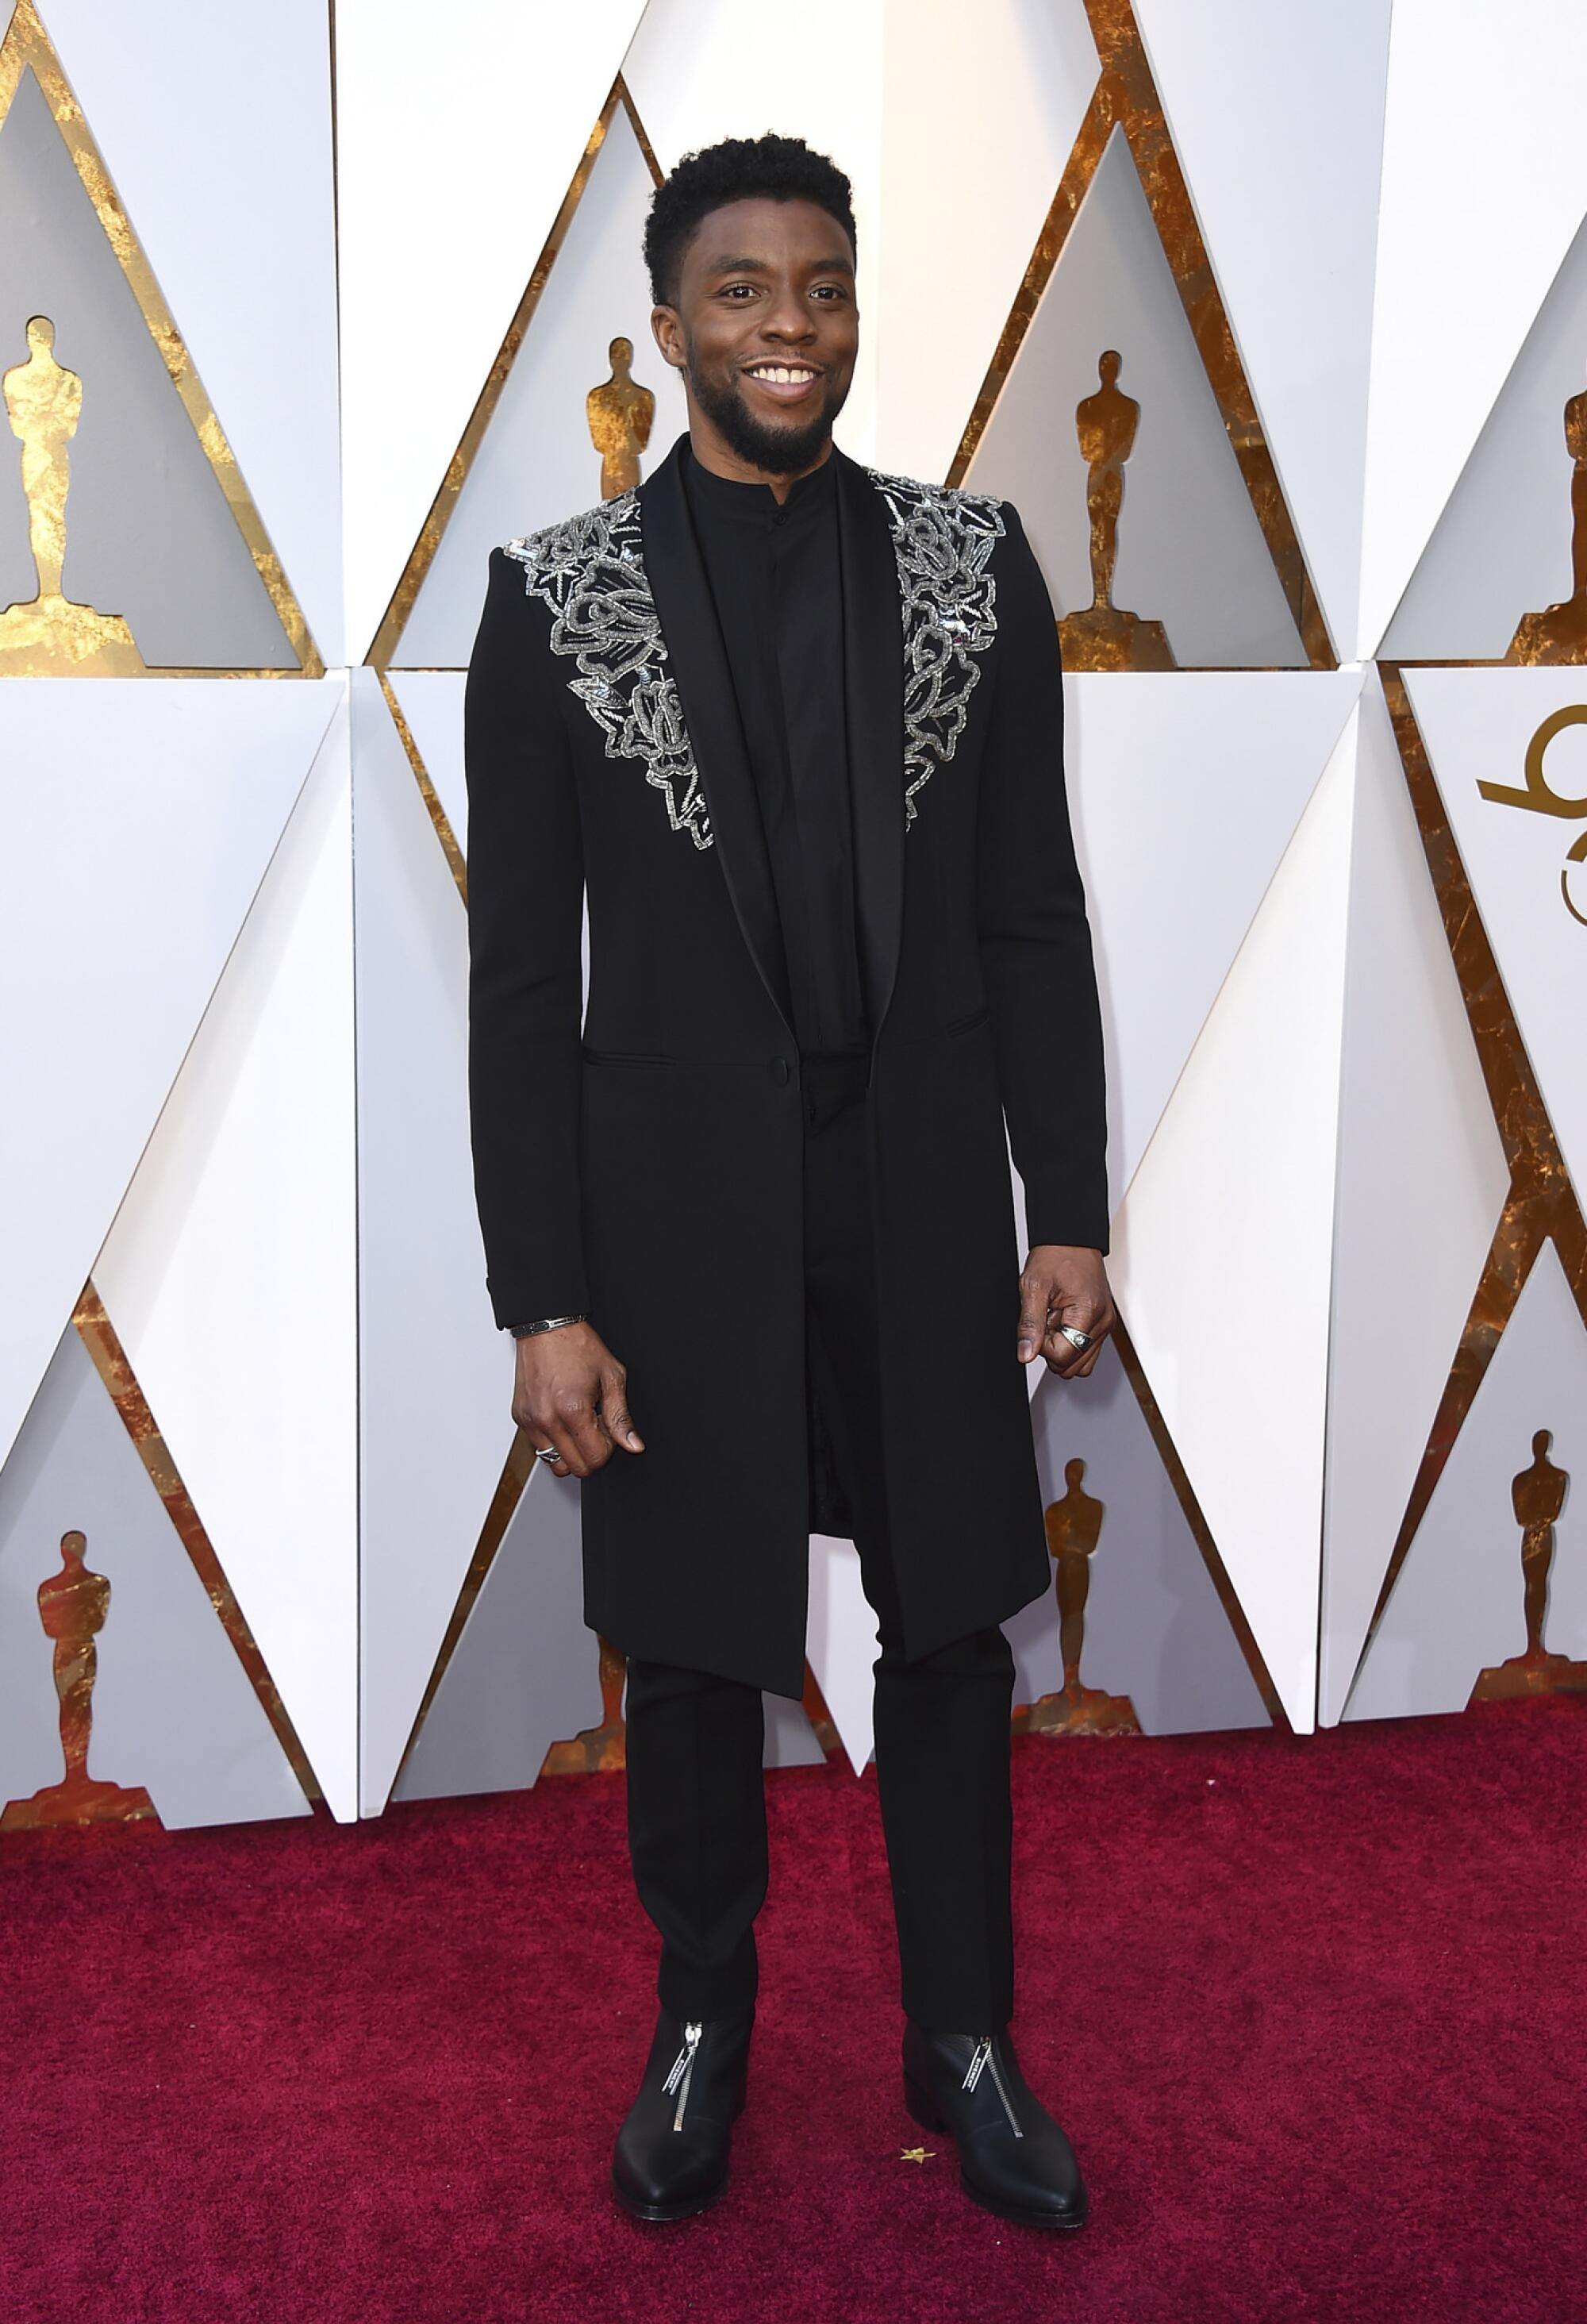 Chadwick Boseman on the red carpet at the Academy Awards in 2018.